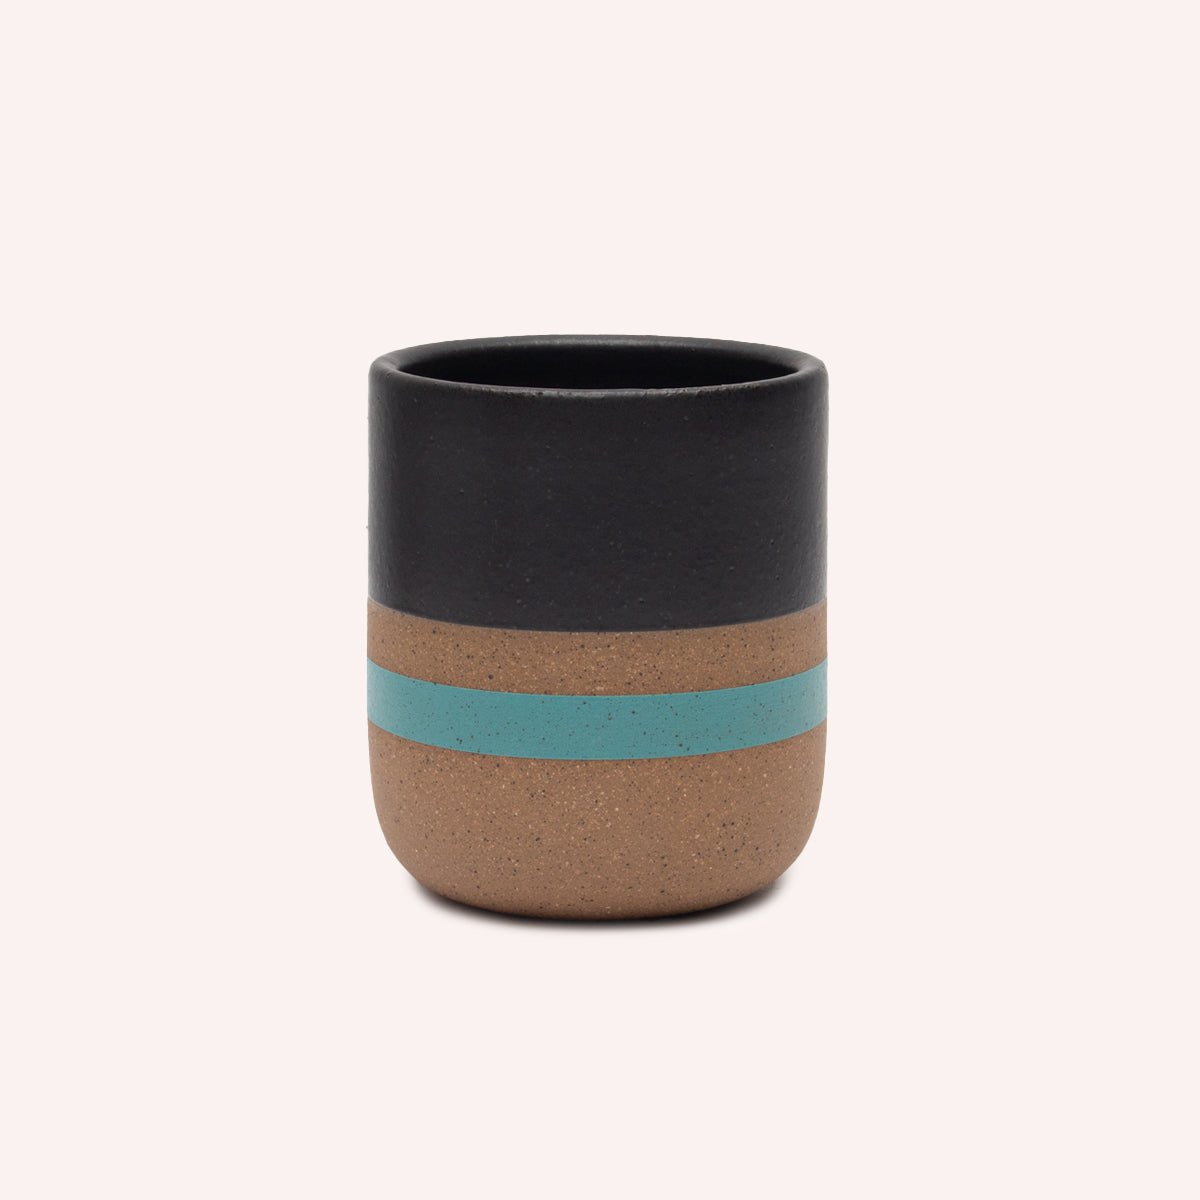 Handleless Mug with black satin glaze and teal stripe. Made in Hood River, Oregon by Wolf Ceramics.